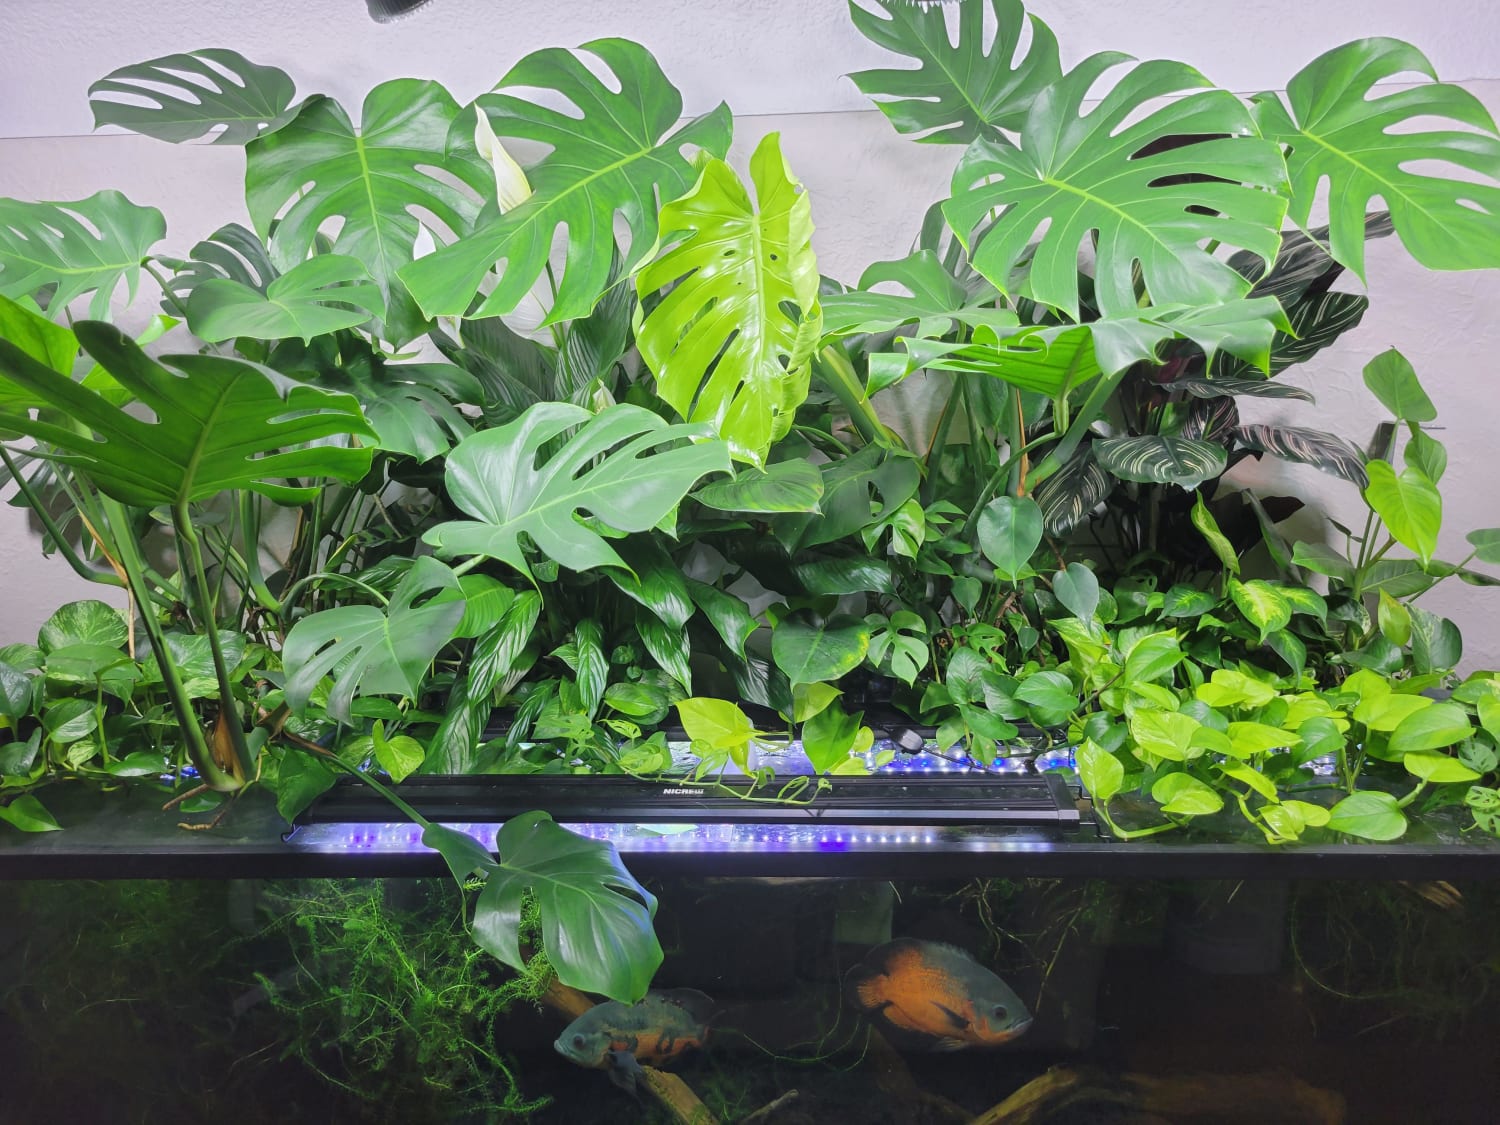 Growing tropical plants out of an aquarium is like using cheat codes for rapid growth. The oscars swimming around are 10" long.